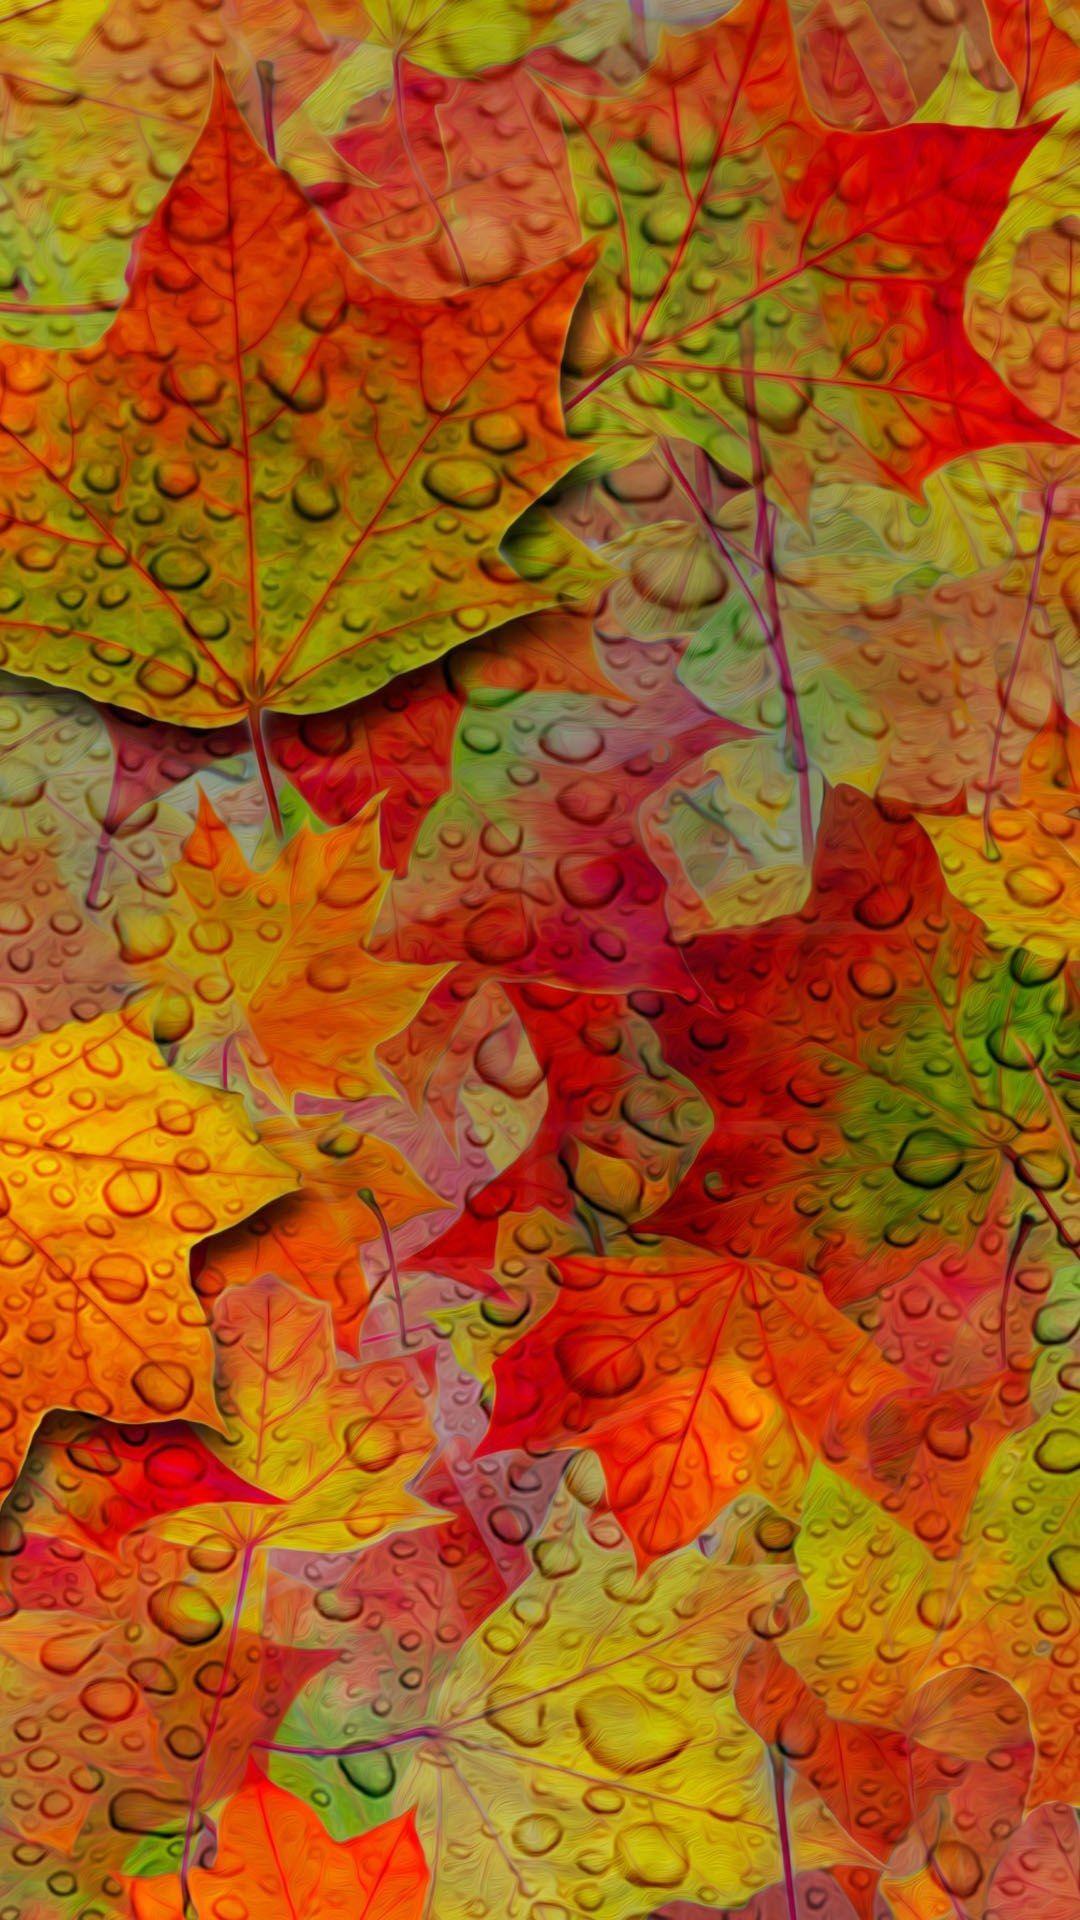 Fall Abstract Wallpapers - Top Free Fall Abstract Backgrounds ...